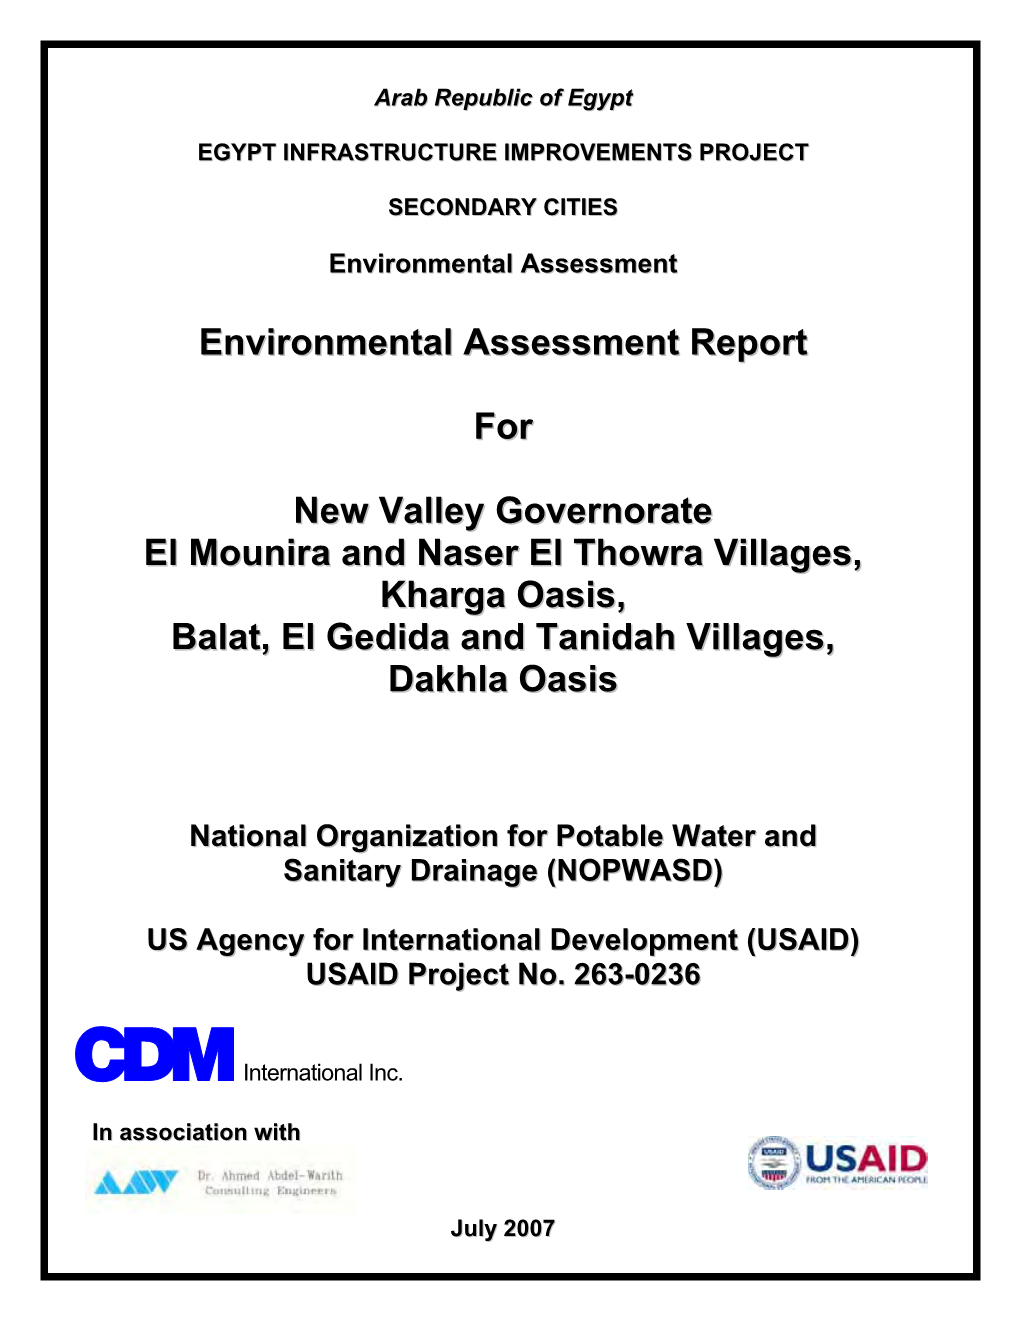 Environmental Assessment Report for New Valley Governorate El